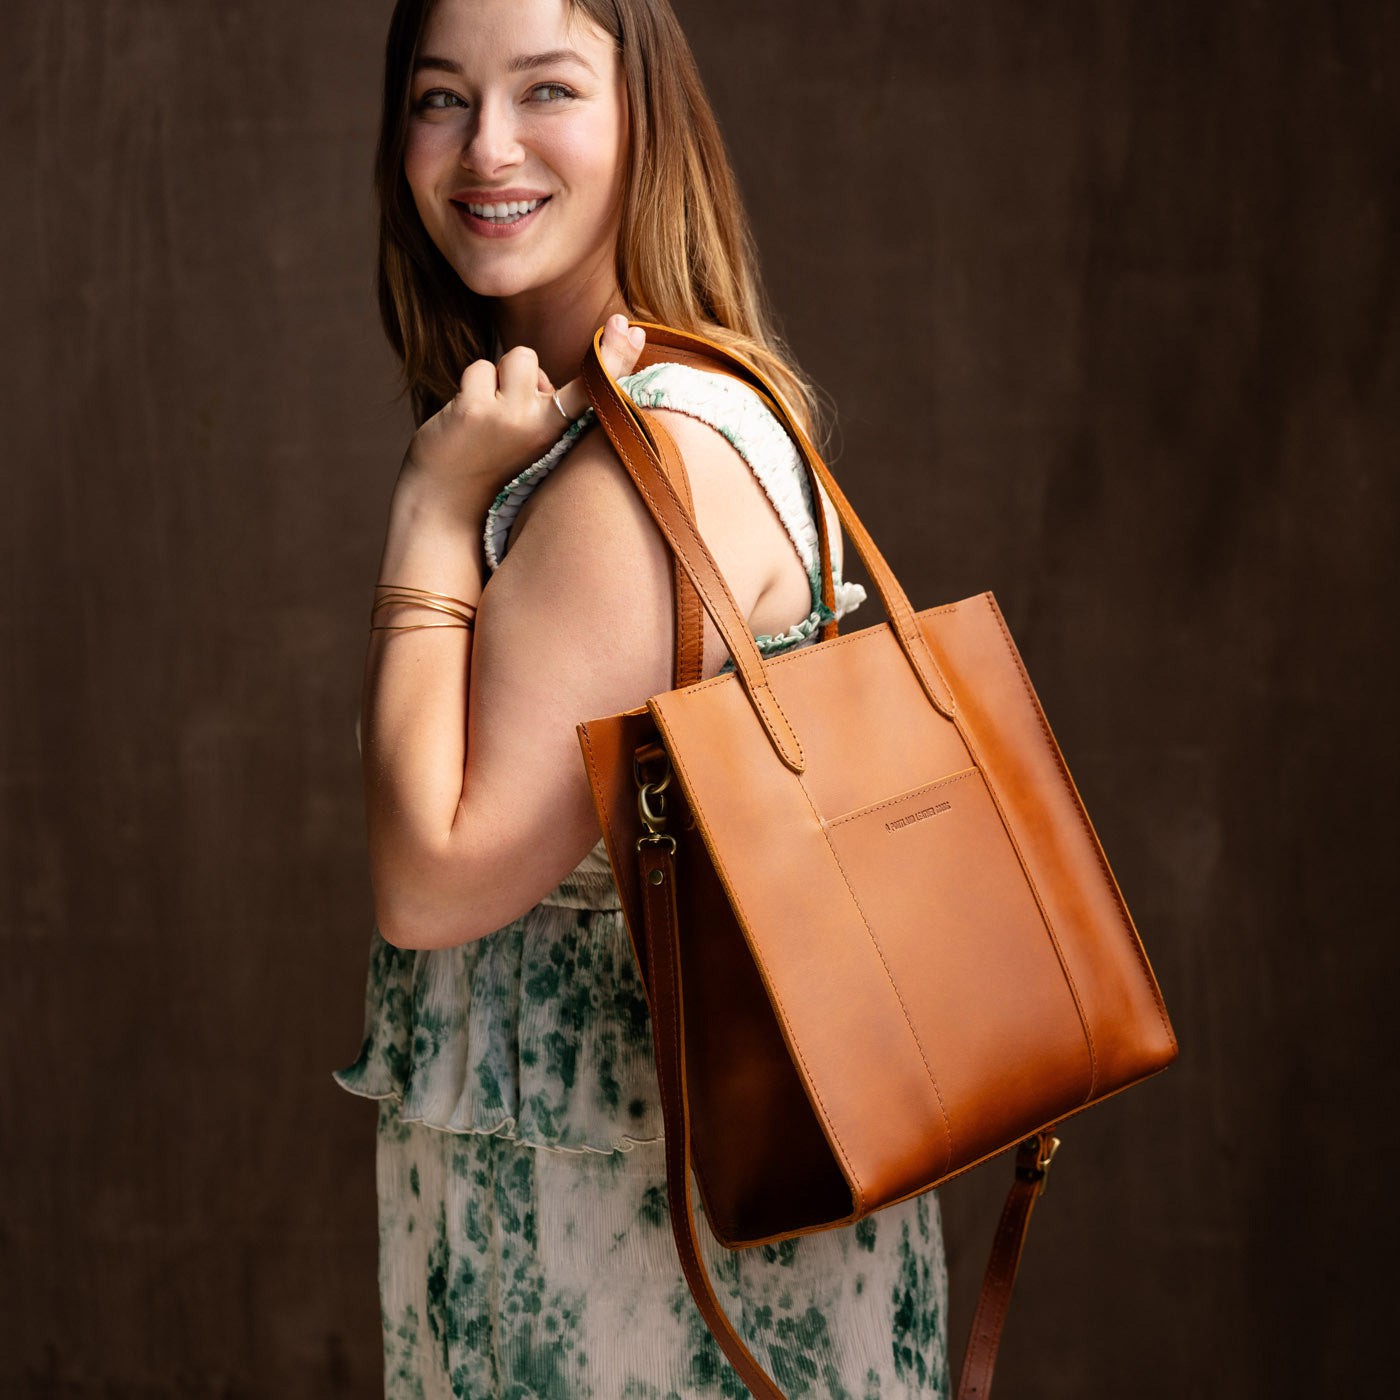 Oil Pull Brown Leather Tote Bag - SALE